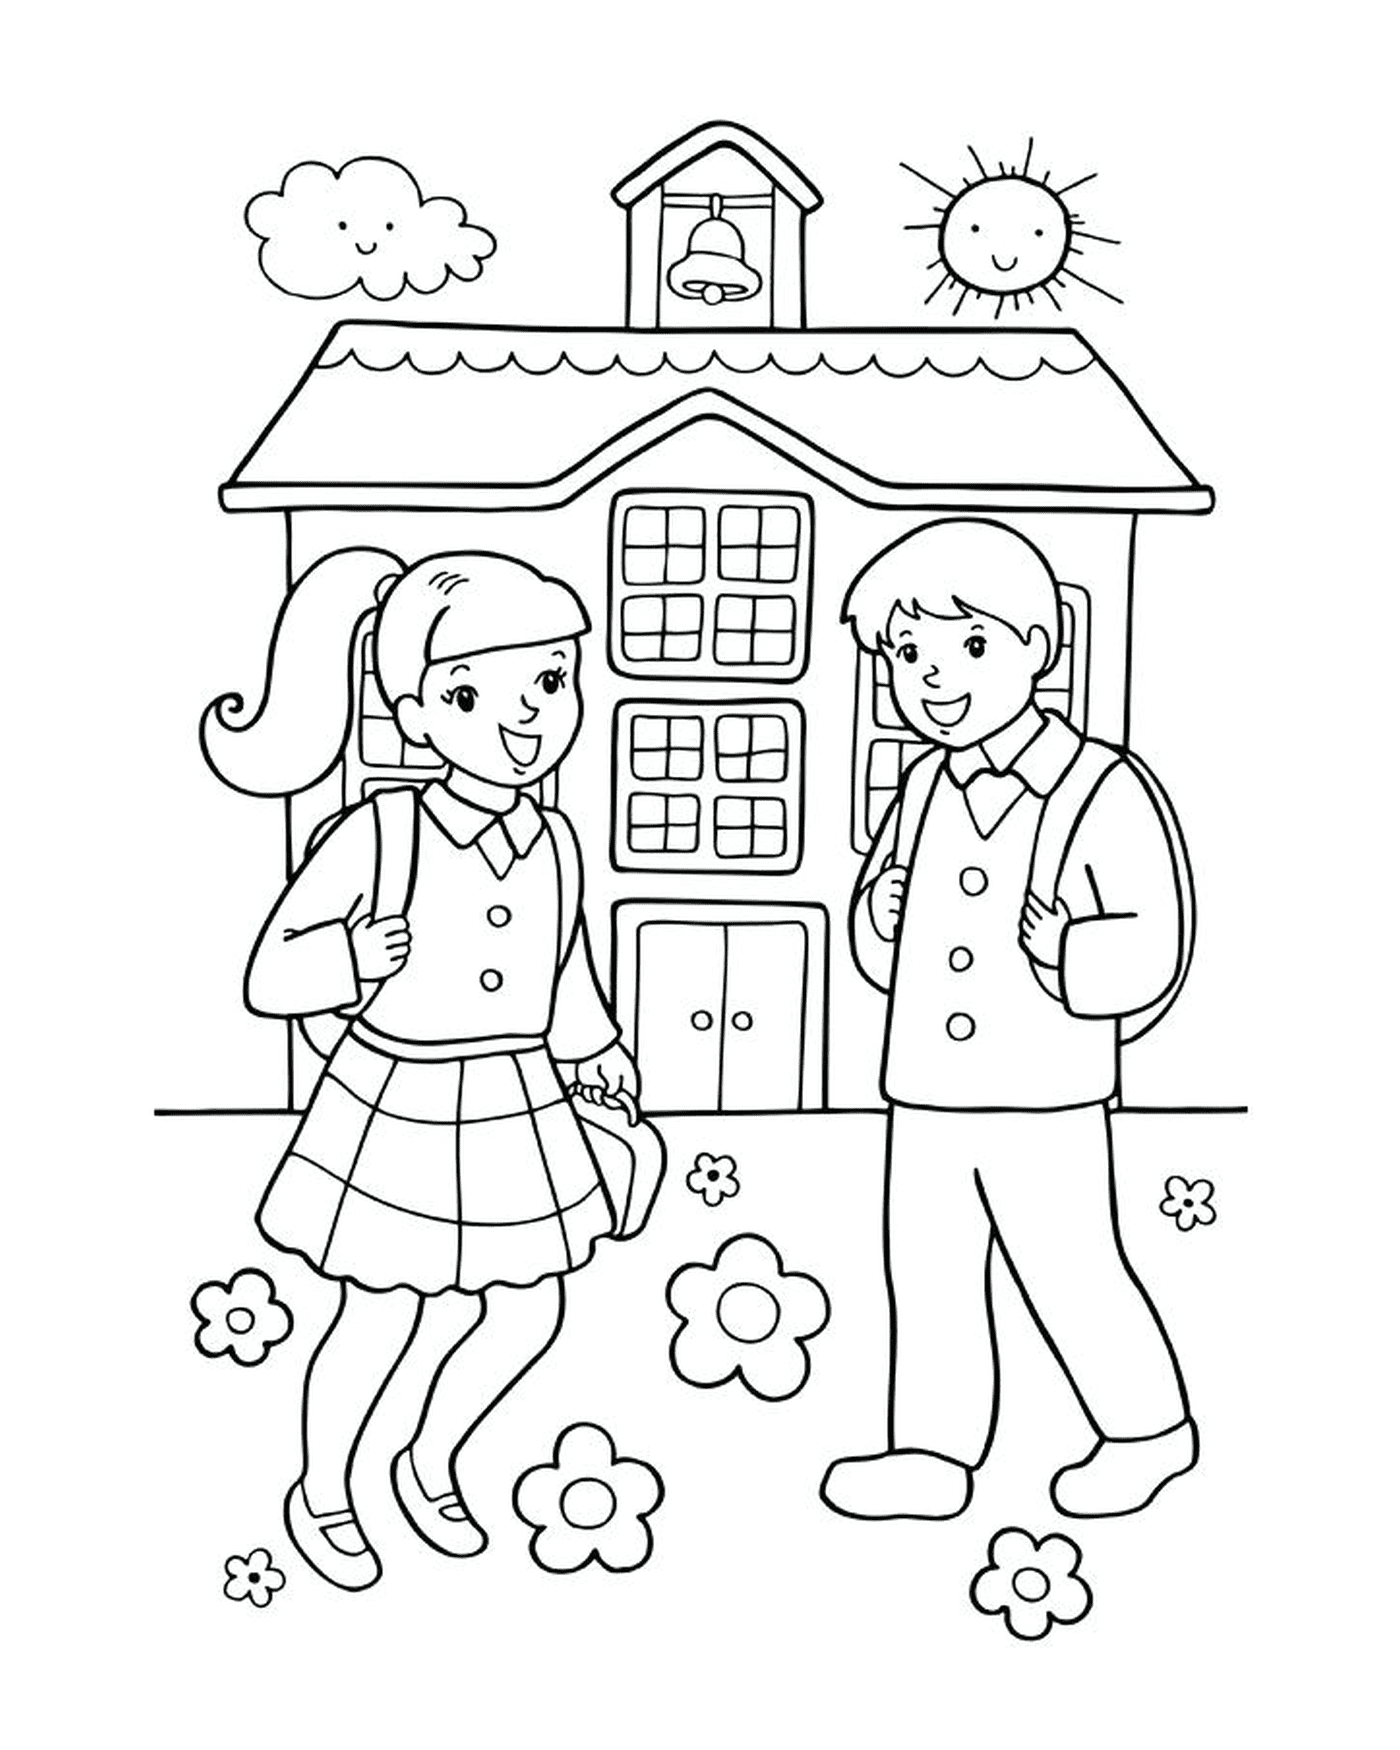  A girl and a boy back to school 